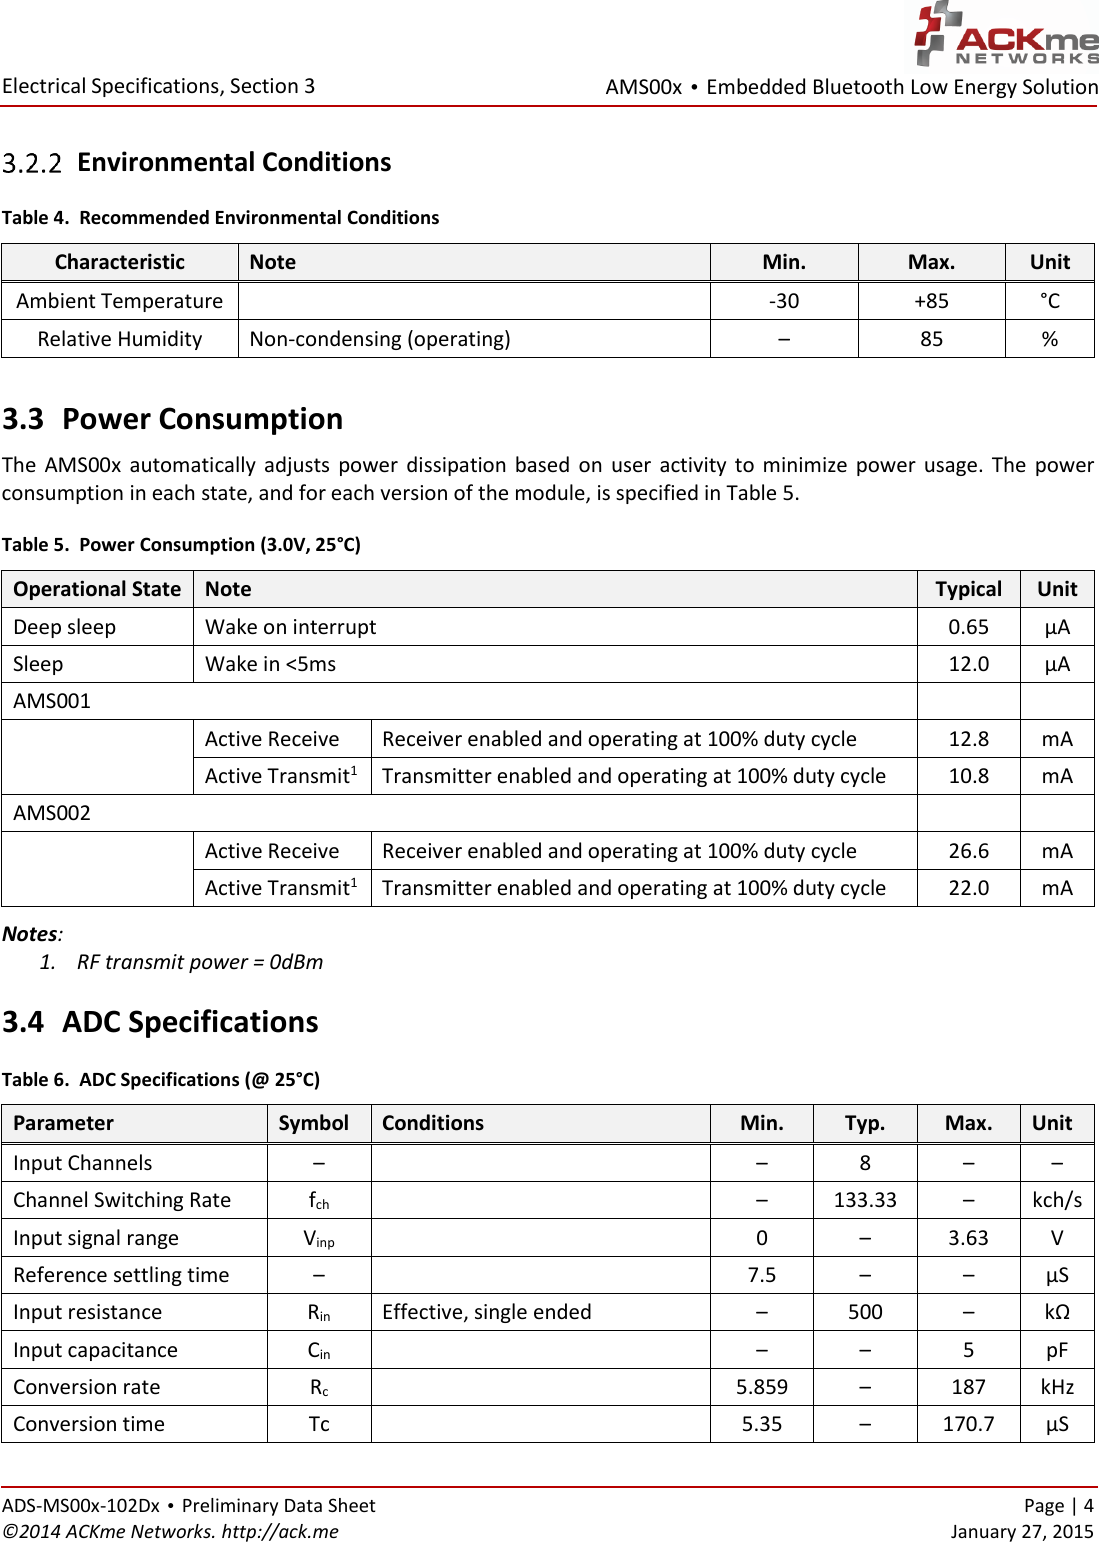 AMS00x • Embedded Bluetooth Low Energy Solution  Electrical Specifications, Section 3 ADS-MS00x-102Dx • Preliminary Data Sheet    Page | 4 ©2014 ACKme Networks. http://ack.me    January 27, 2015  Environmental Conditions Table 4.  Recommended Environmental Conditions Characteristic Note Min. Max. Unit Ambient Temperature  -30 +85 °C Relative Humidity Non-condensing (operating) – 85 %  3.3 Power Consumption The  AMS00x  automatically adjusts  power  dissipation  based  on  user  activity to  minimize  power  usage.  The  power consumption in each state, and for each version of the module, is specified in Table 5. Table 5.  Power Consumption (3.0V, 25°C) Operational State Note Typical Unit Deep sleep Wake on interrupt 0.65 µA Sleep Wake in &lt;5ms 12.0 µA AMS001    Active Receive Receiver enabled and operating at 100% duty cycle 12.8 mA Active Transmit1 Transmitter enabled and operating at 100% duty cycle 10.8 mA AMS002    Active Receive Receiver enabled and operating at 100% duty cycle 26.6 mA Active Transmit1 Transmitter enabled and operating at 100% duty cycle 22.0 mA Notes:  1. RF transmit power = 0dBm 3.4 ADC Specifications Table 6.  ADC Specifications (@ 25°C) Parameter Symbol Conditions Min. Typ. Max. Unit Input Channels –  – 8 – – Channel Switching Rate fch  – 133.33 – kch/s Input signal range Vinp  0 – 3.63 V Reference settling time –  7.5 – – µS Input resistance Rin Effective, single ended – 500 – kΩ Input capacitance Cin  – – 5 pF Conversion rate Rc  5.859 – 187 kHz Conversion time Tc  5.35 – 170.7 µS 